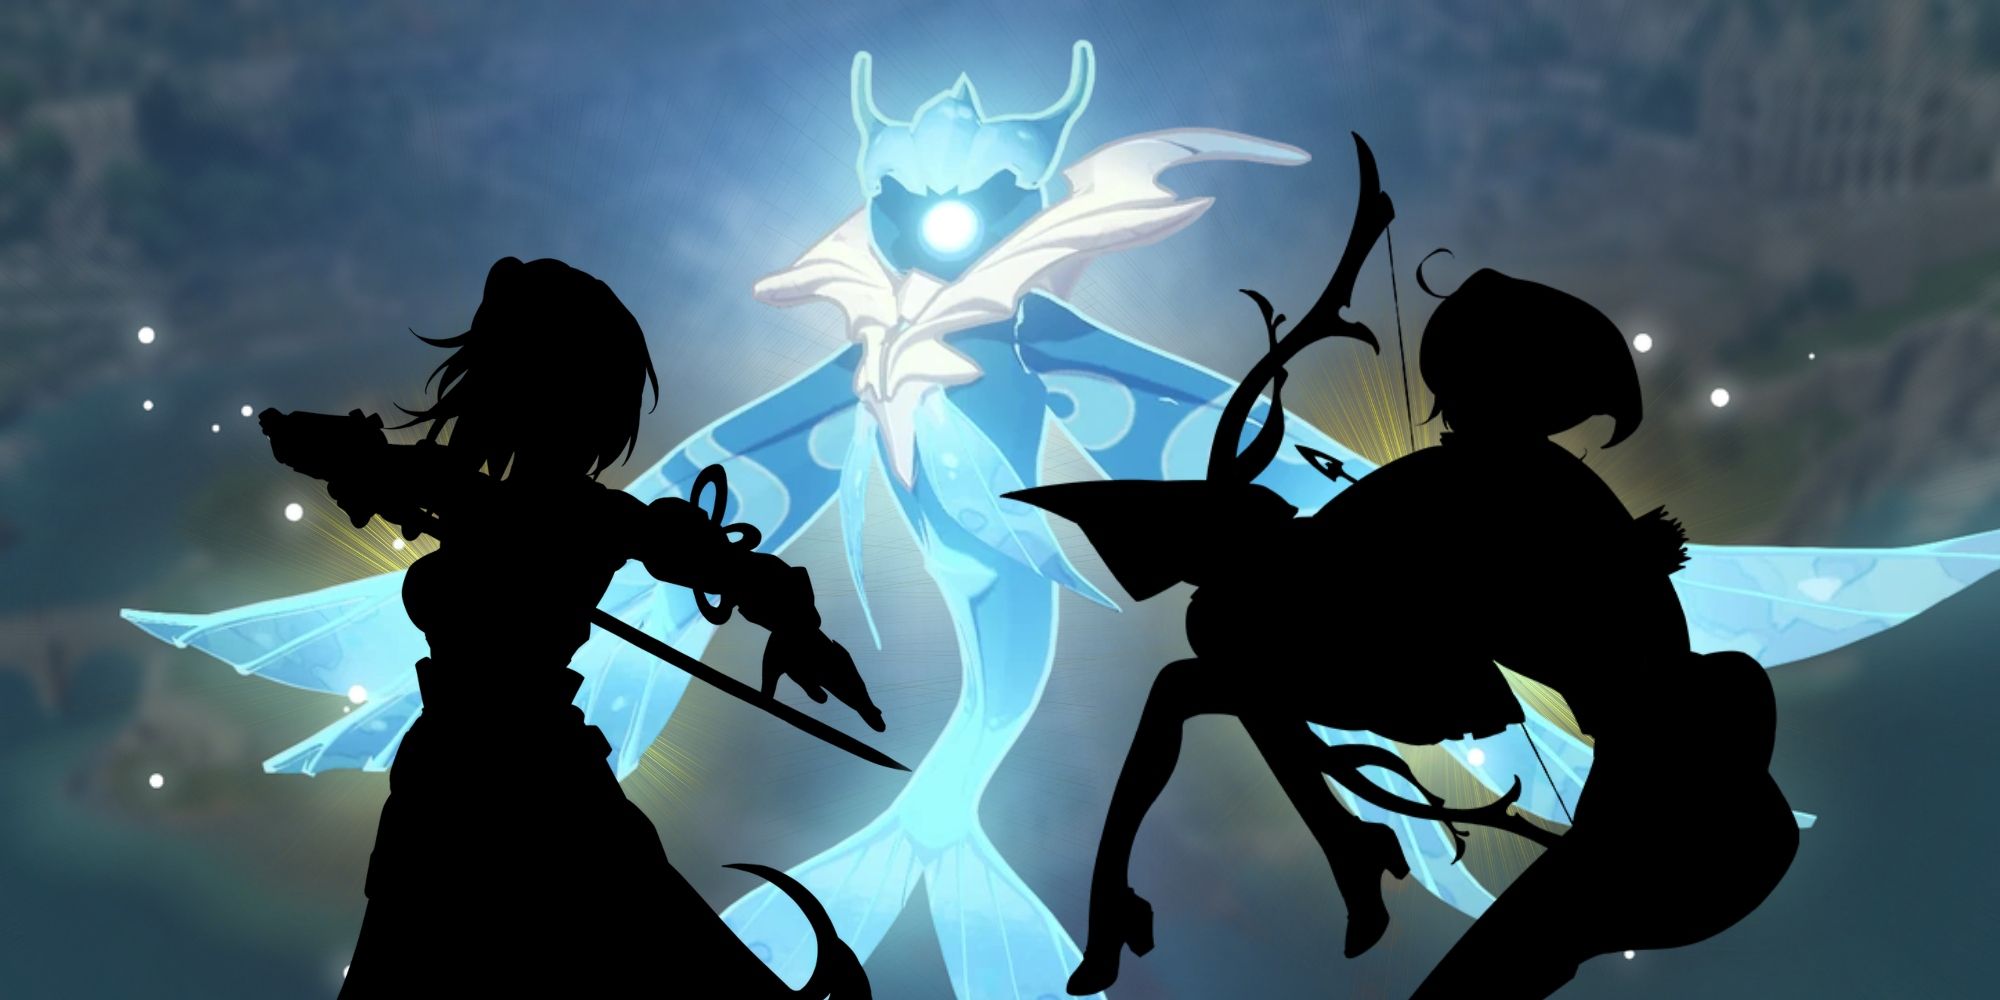 A Genshin Impact Oceanid in the middle with a light blue backlight. To each of its sides is the sillhouette of a Honkai Impact 3rd character to represent upcoming Genshin Impact 4.0 characters.